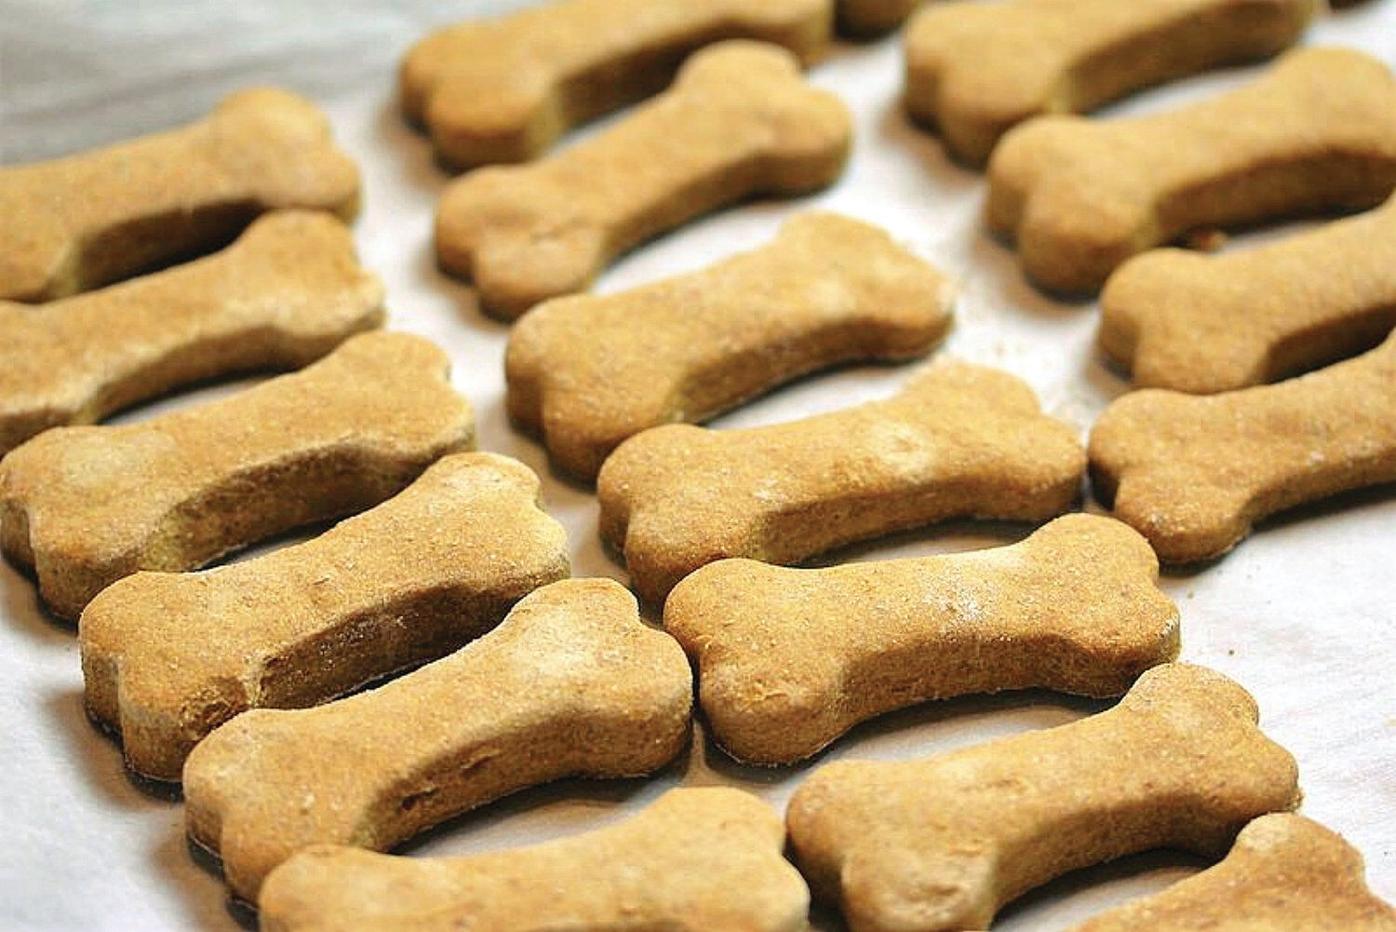 Cook for Your Pet Day: Your pets deserve tasty treats too